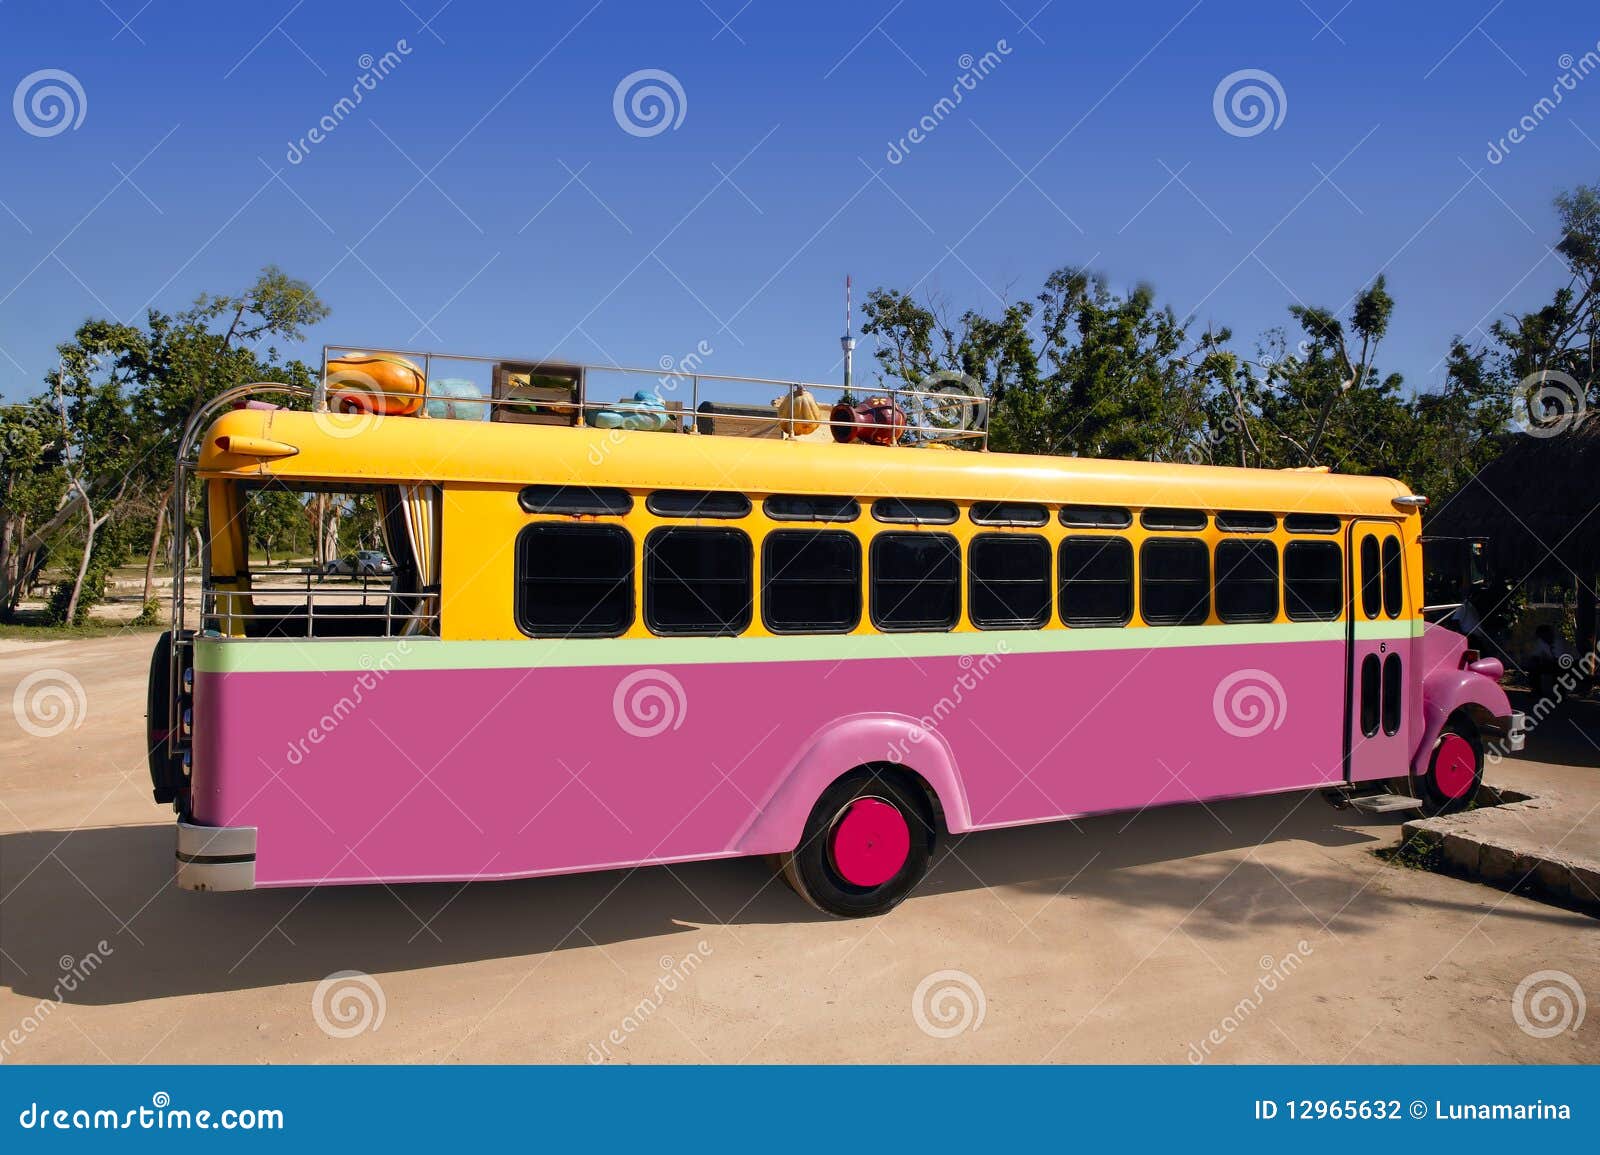 colorful bus yellow and pink touristic tropical